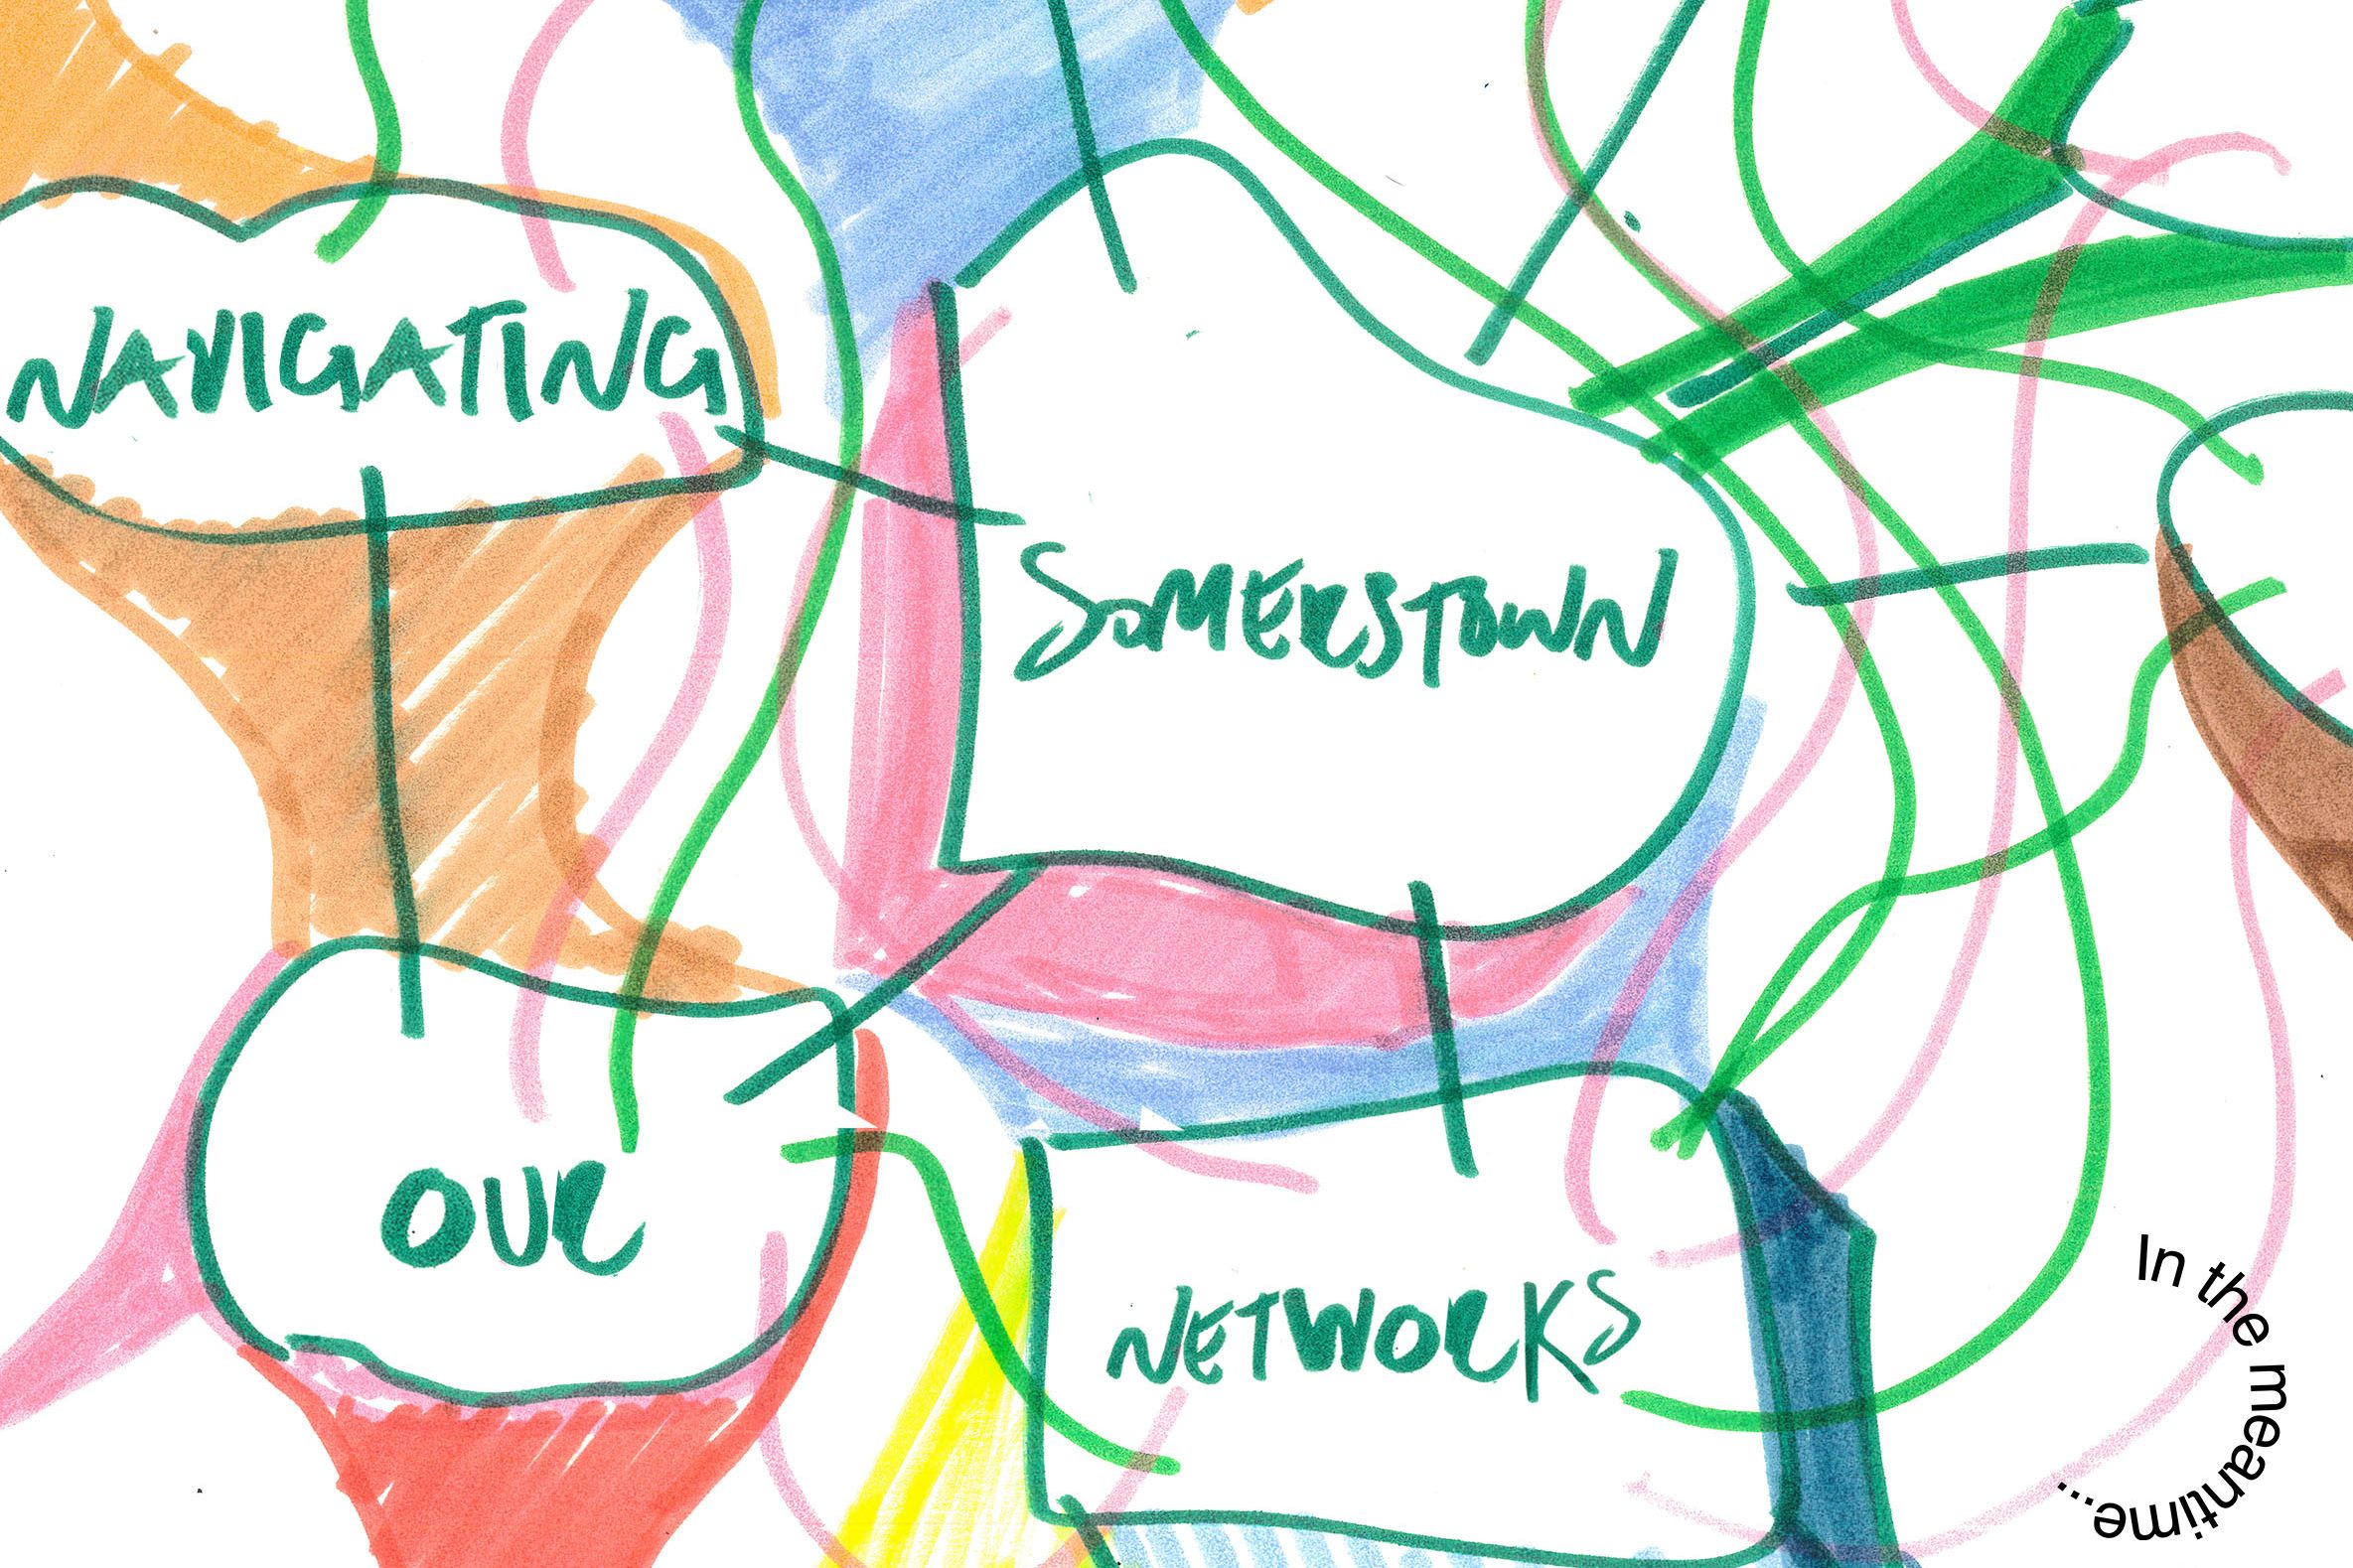 Diagram illustrating Navigating Our Somers Town Networks